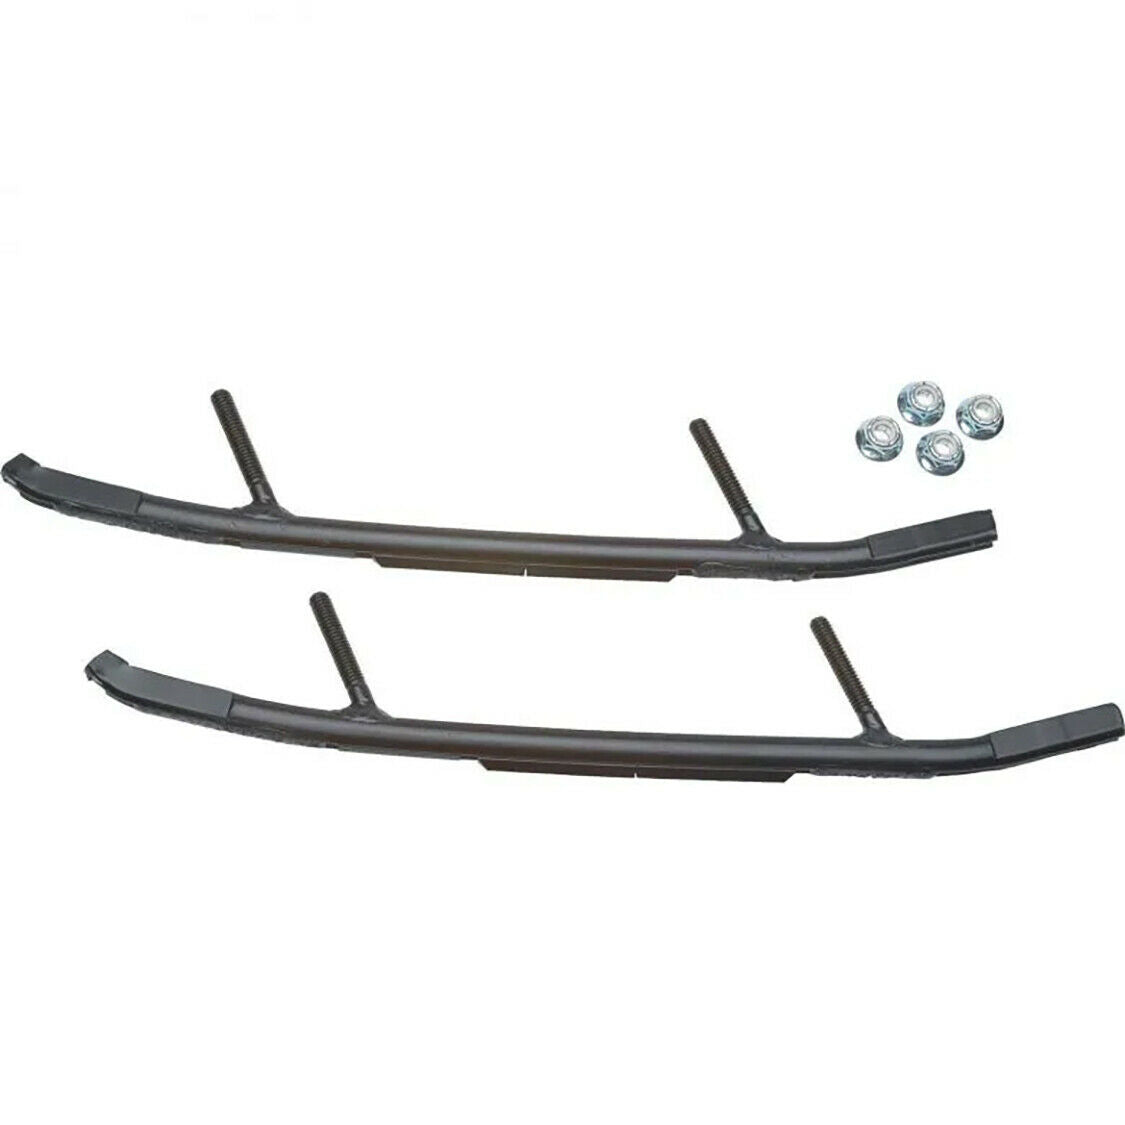 Ski-Doo Extender Trail III Carbides Pack of 2 860200578